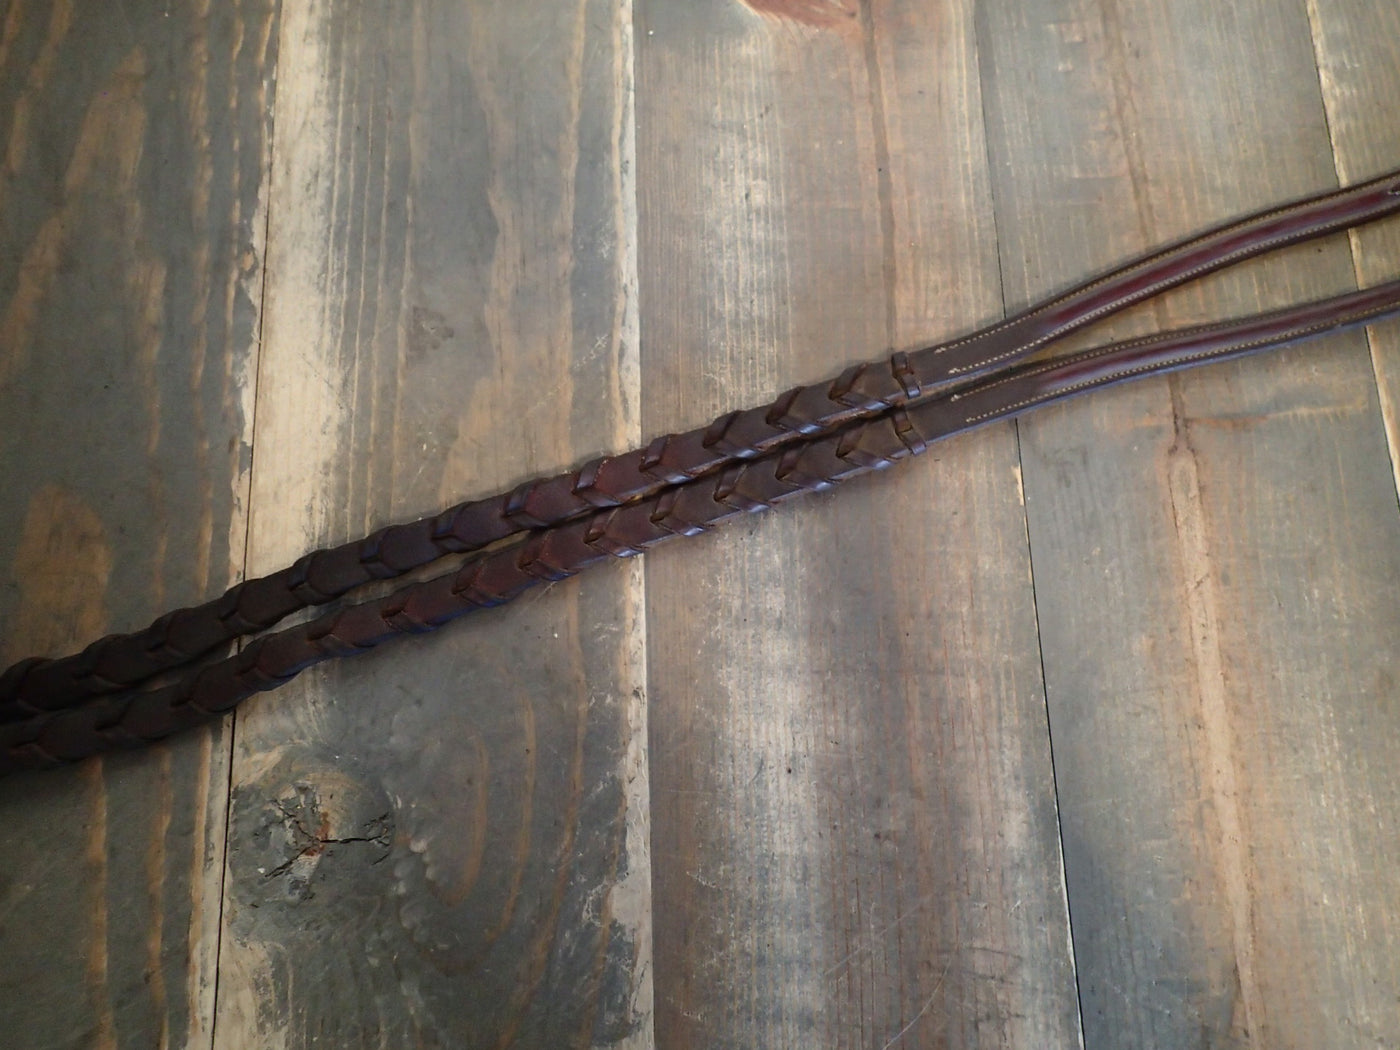 Edgewood Fancy Stitched Laced Reins - need repair